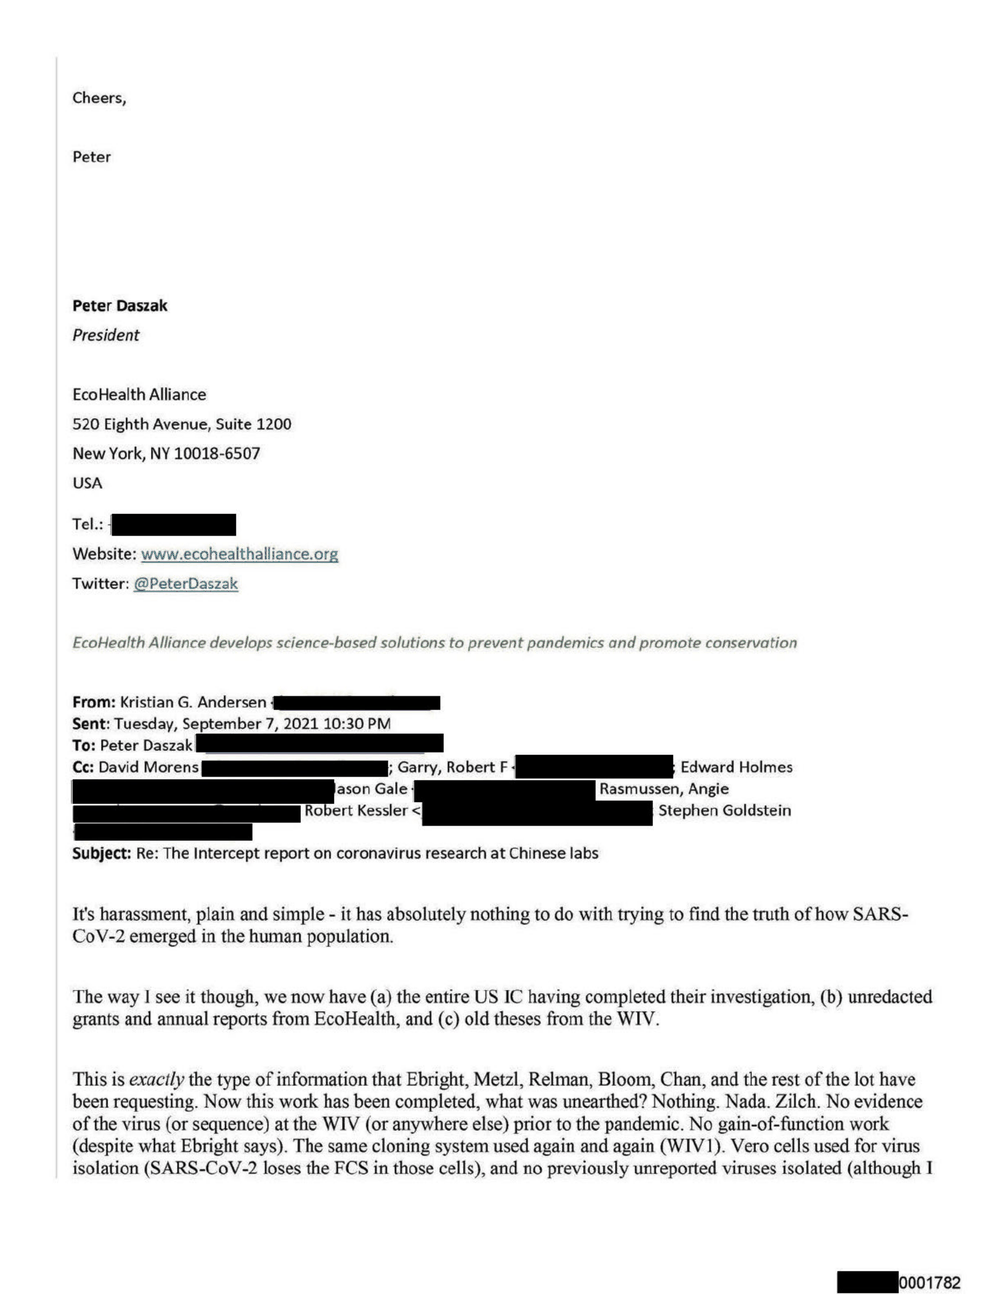 Page 9 from David Morens NIH Emails Redacted